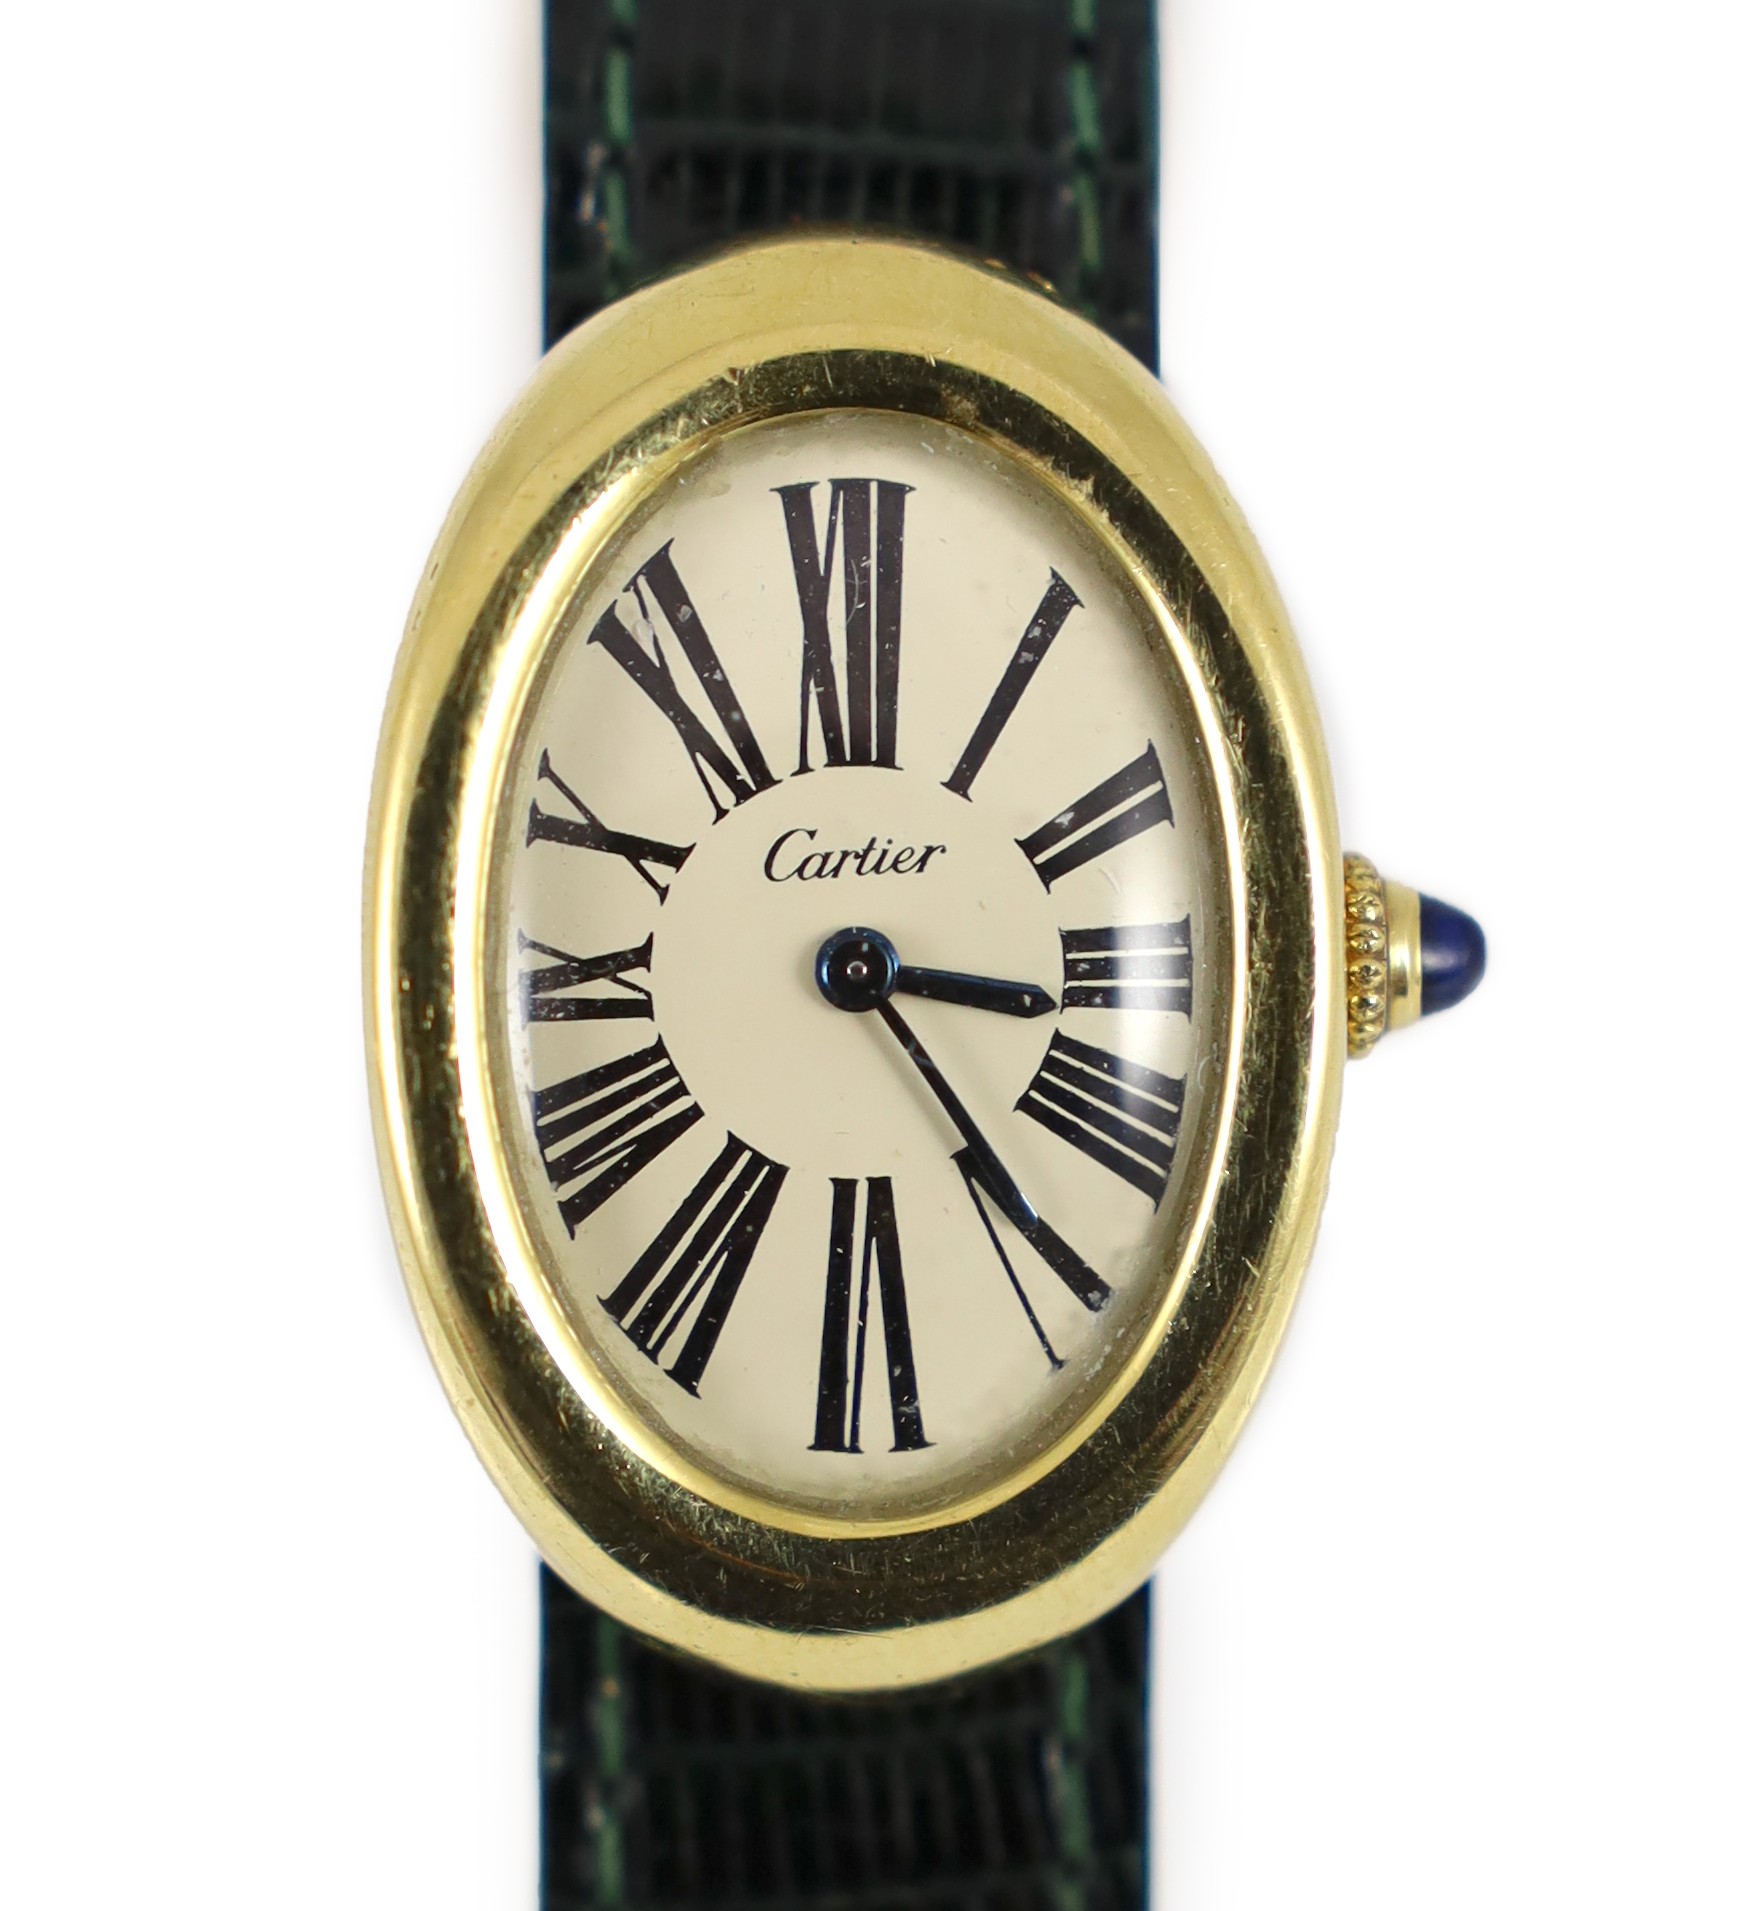 A lady's 18ct gold Cartier Baignoire manual wind oval wrist watch, on a Cartier green leather strap with deployment clasp